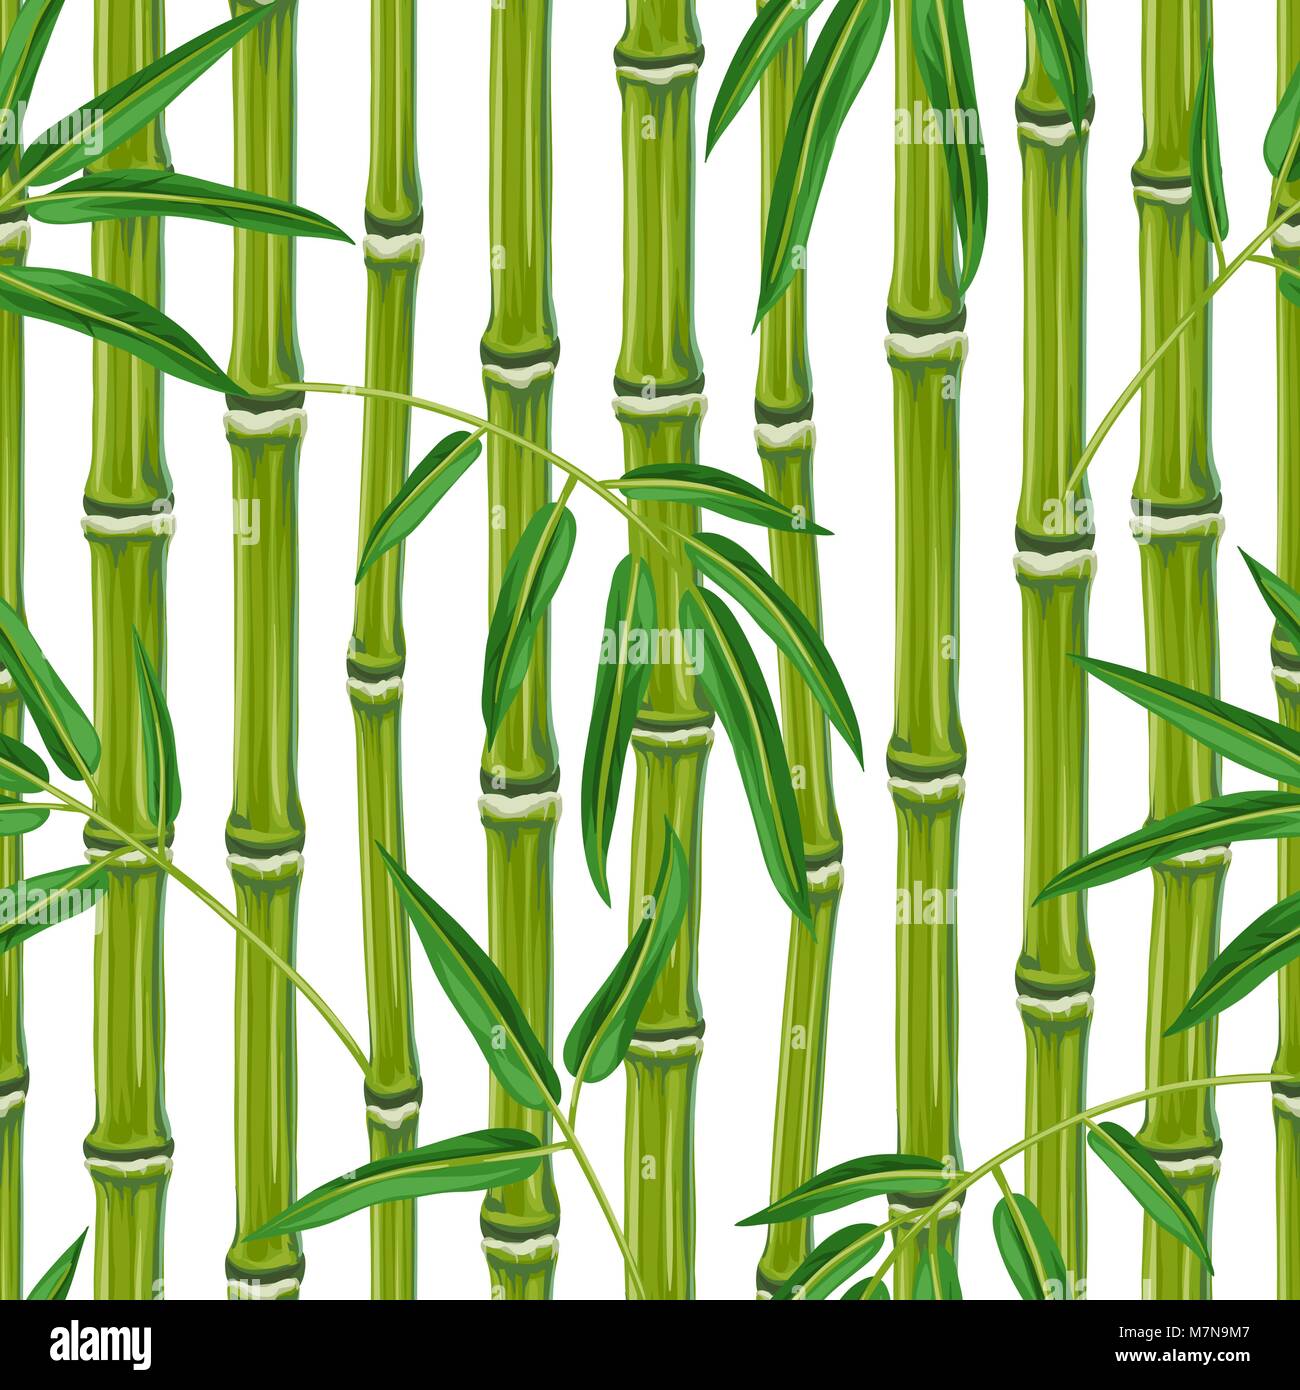 Seamless pattern with bamboo plants and leaves. Background made without clipping mask. Easy to use for backdrop, textile, wrapping paper Stock Vector